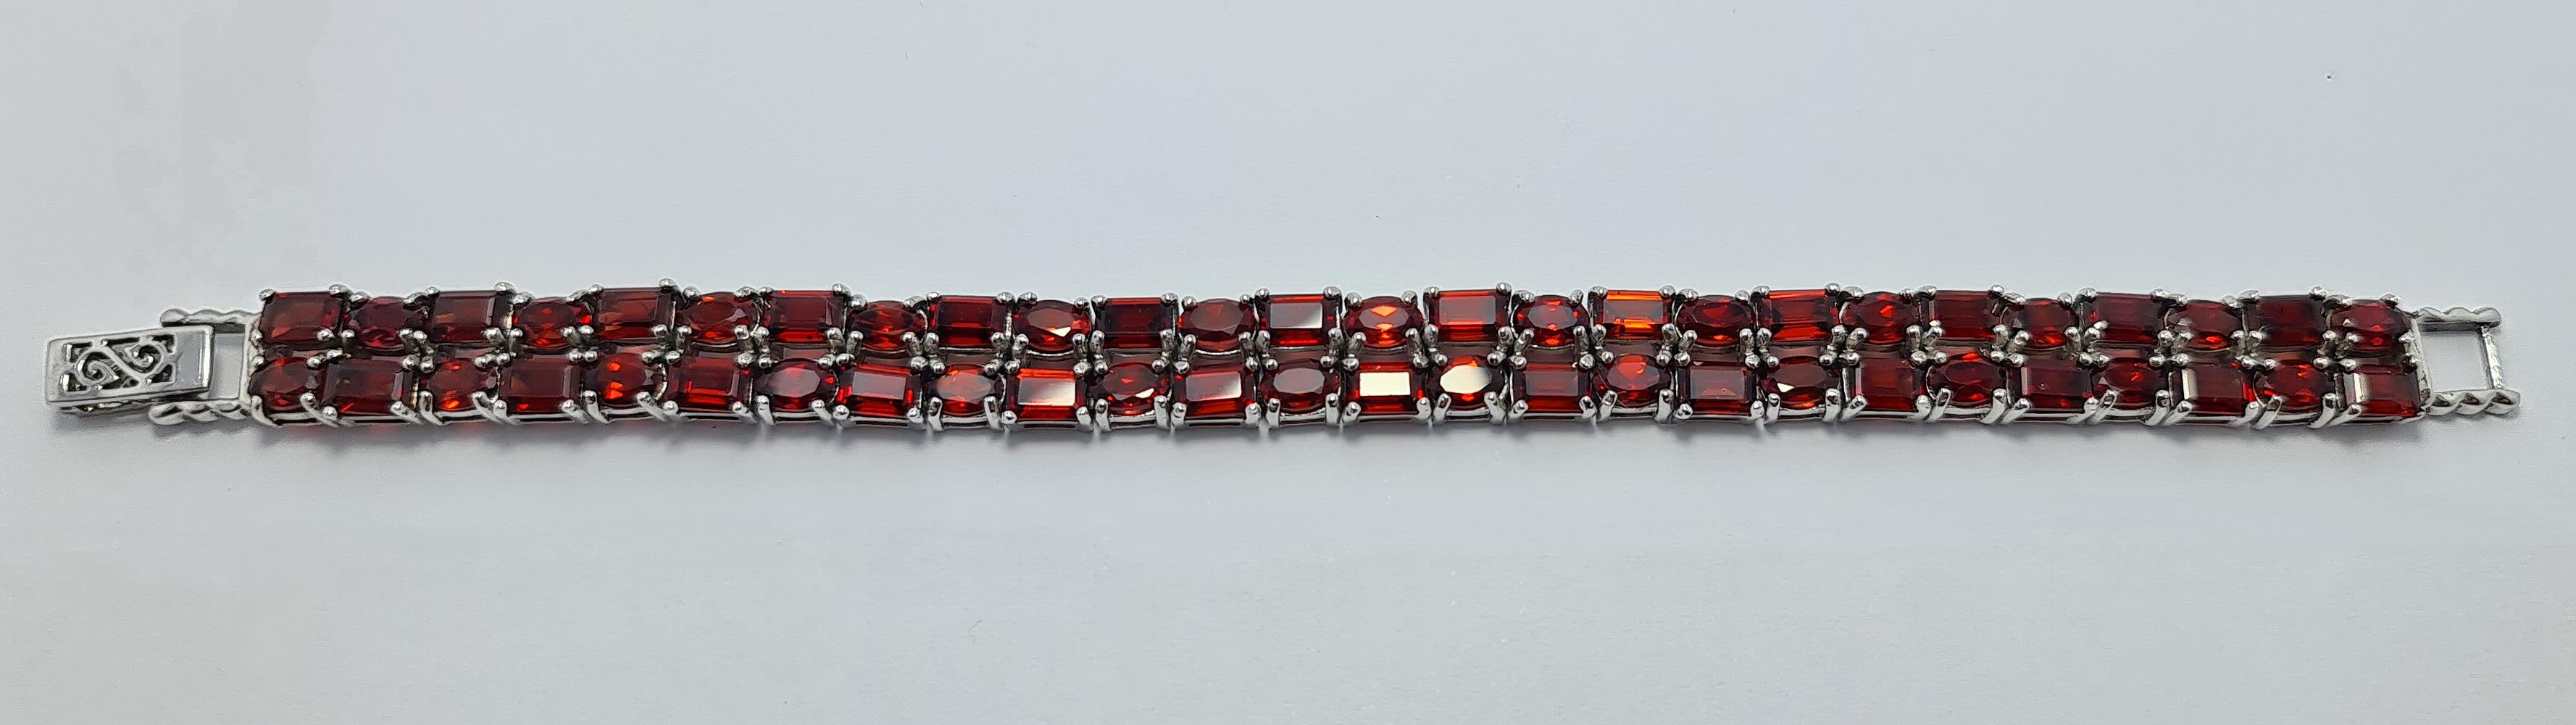 Natural Garnet Tennis Bracelet set in Pure 925 Sterling Silver with Rhodium Plating

Carat weight: 19 carats
Total bracelet weight: 33 grams
The Length of the Bracelet is 7 inches